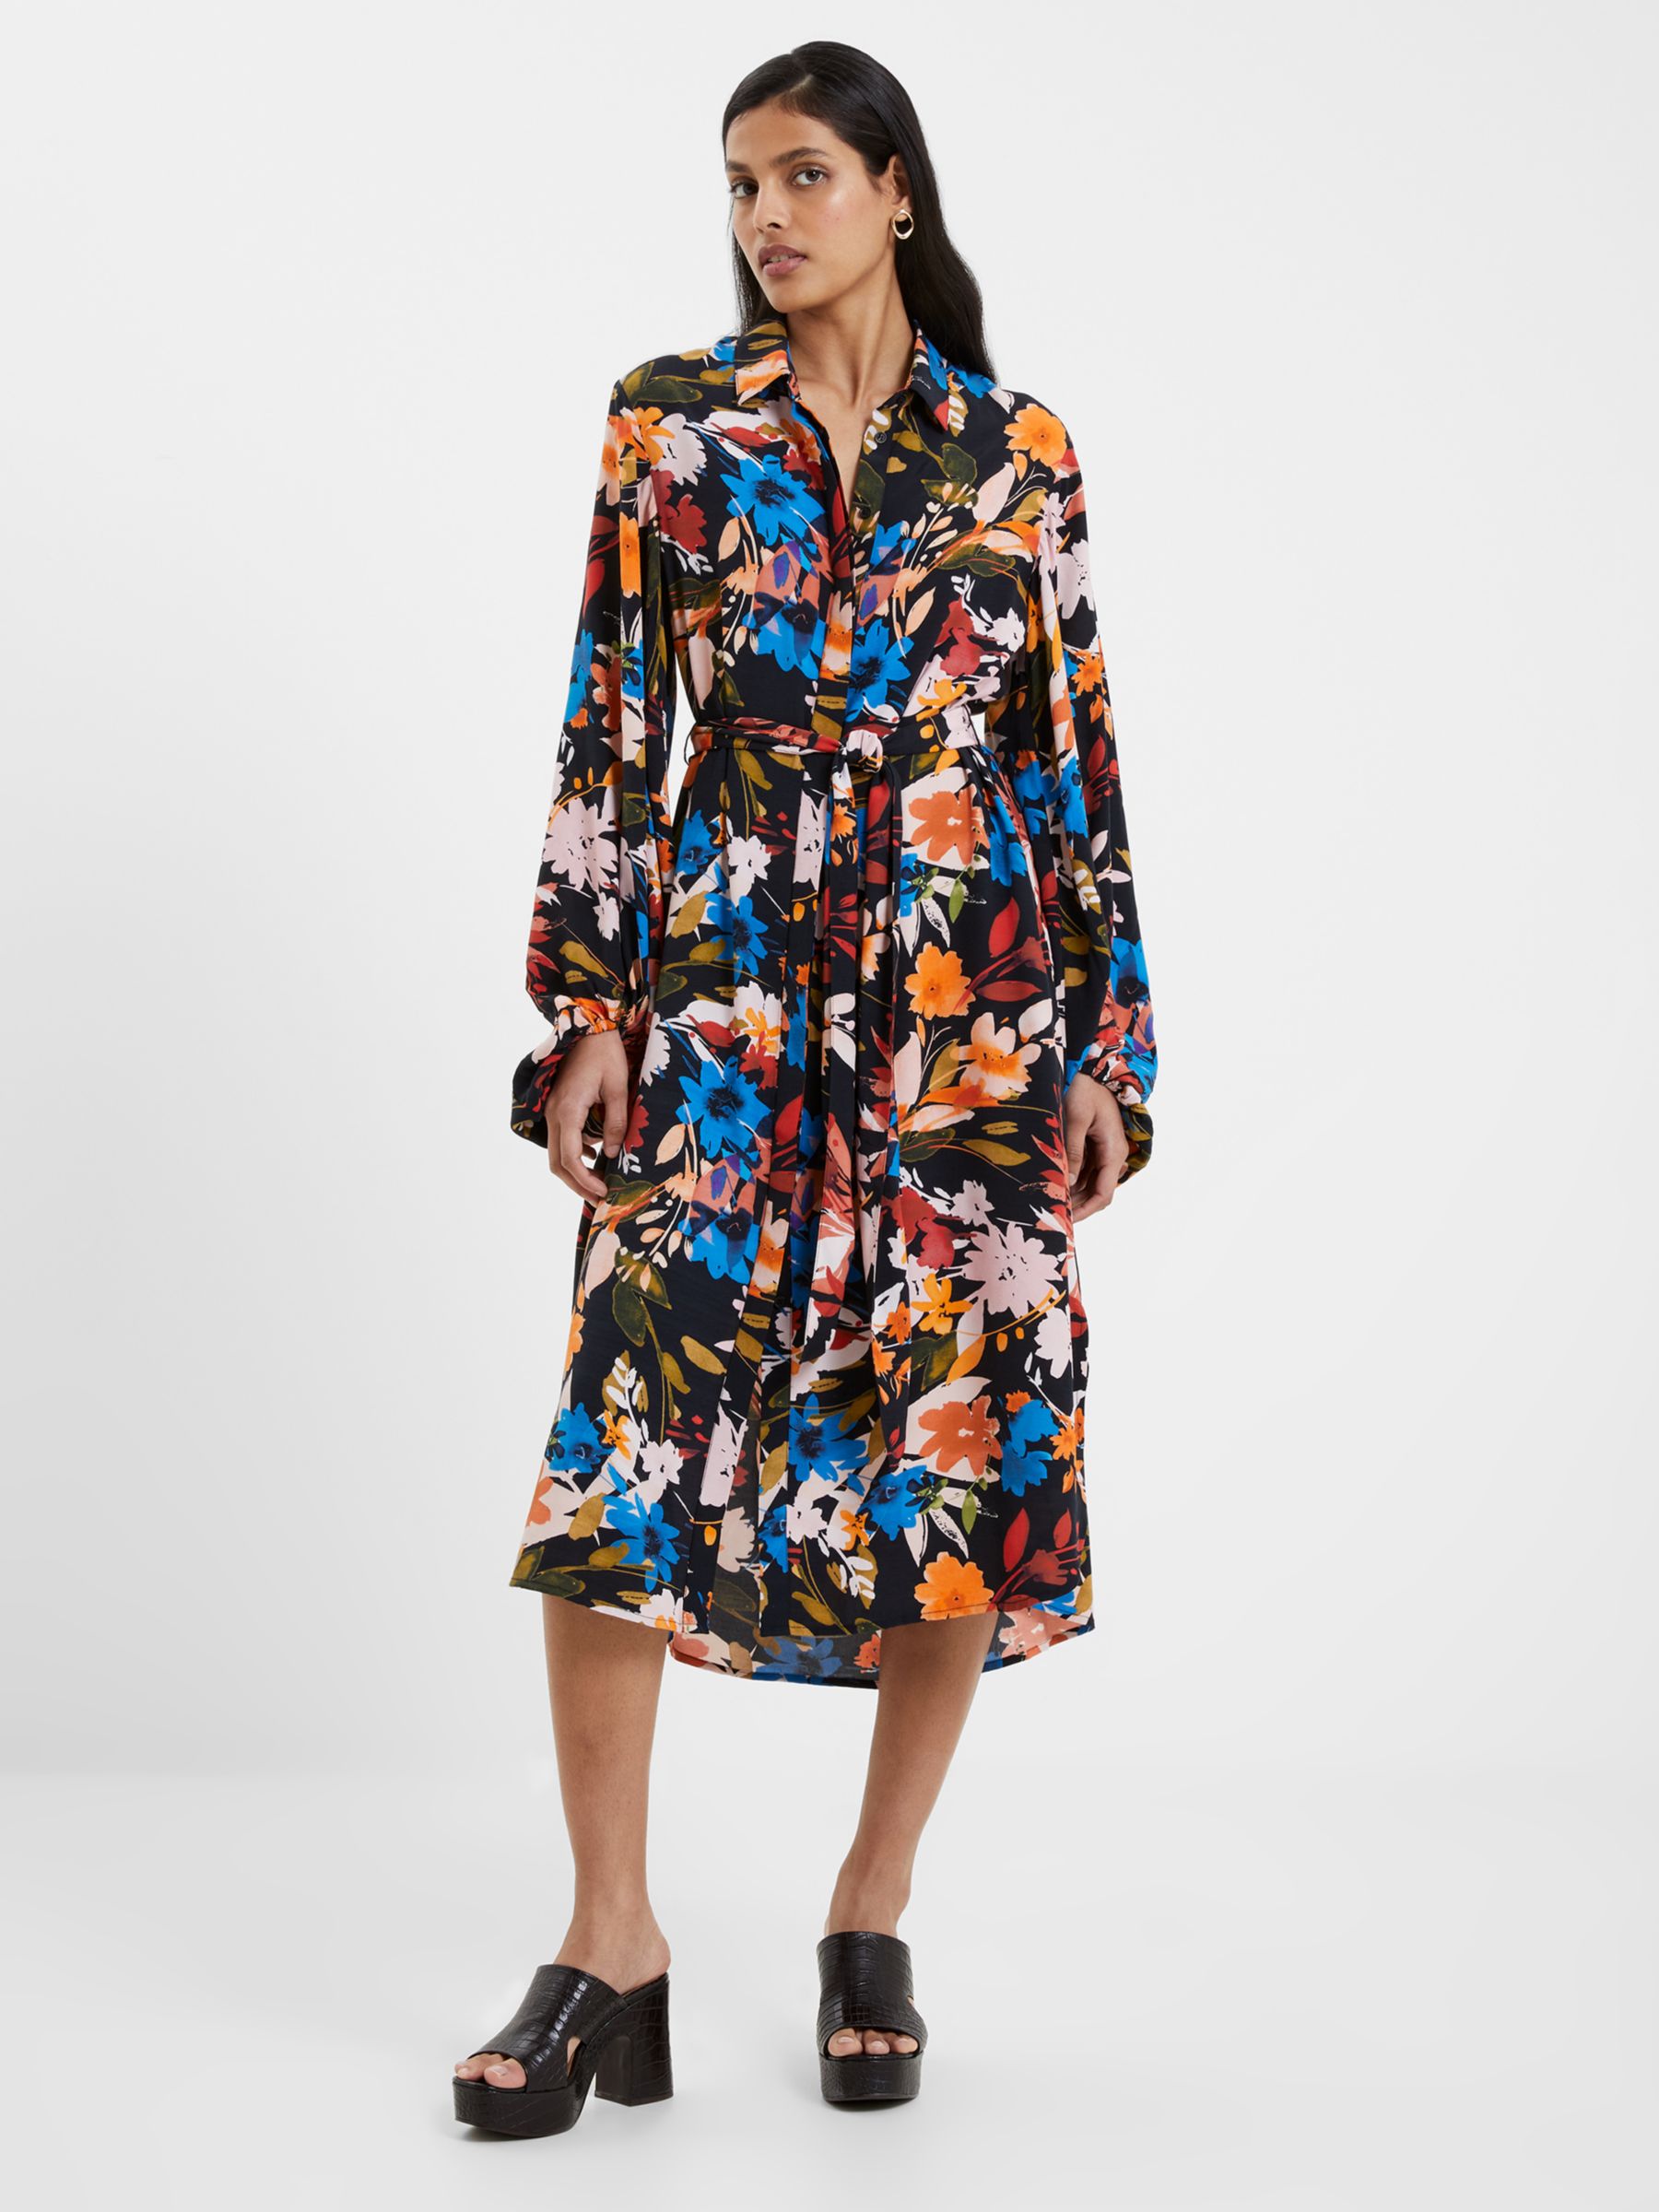 French Connection Brook Delphine Shirt Dress, Multi